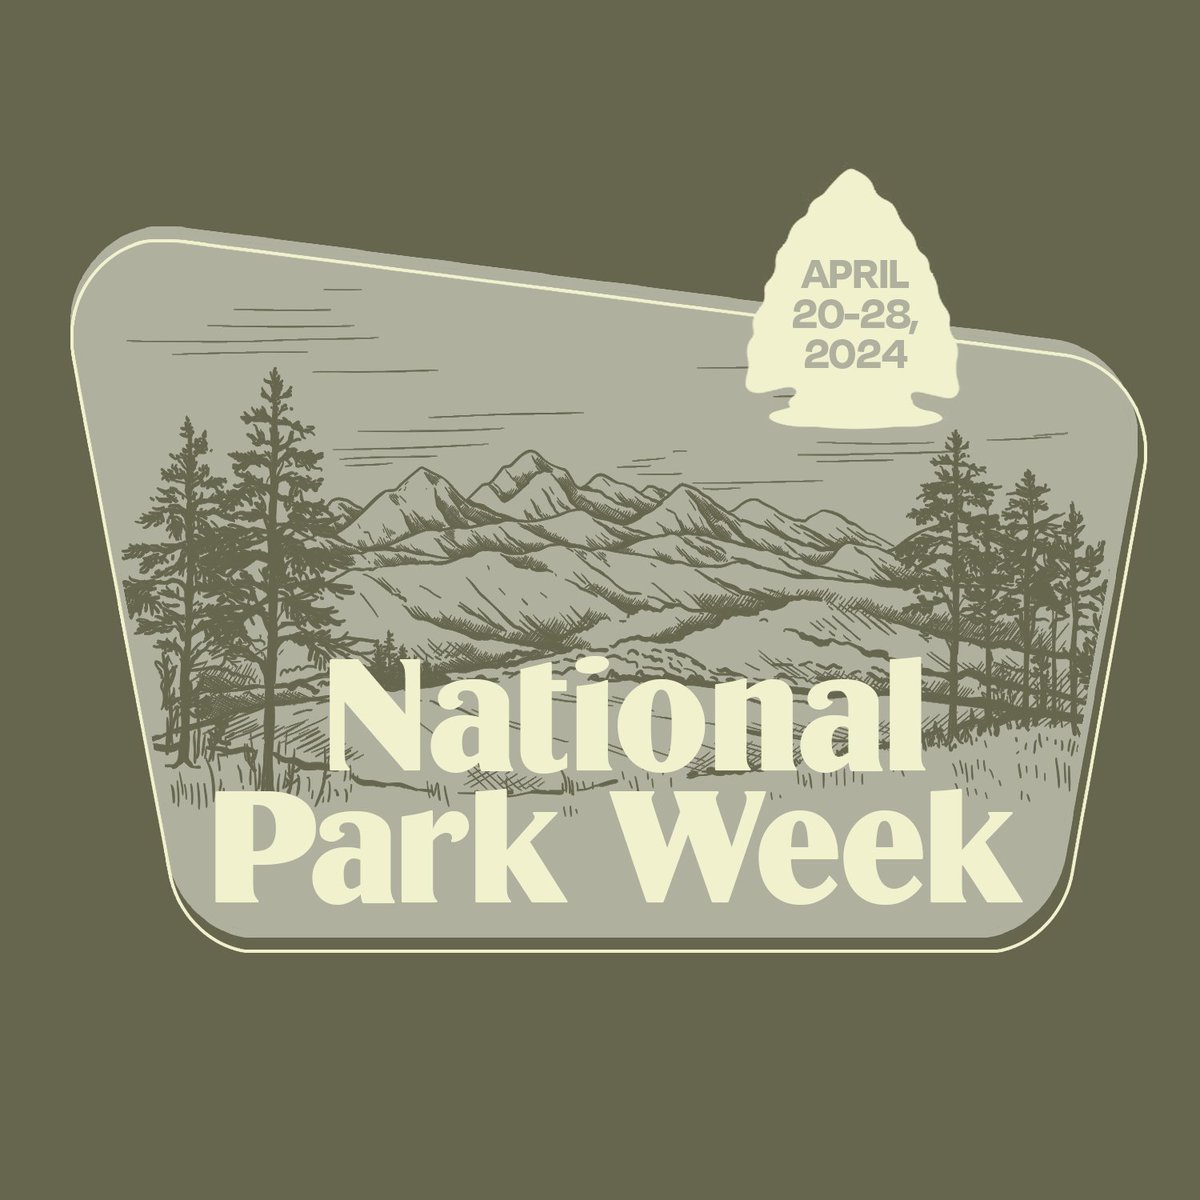 Happy #NationalParkWeek, West Virginia! This is such a great time to celebrate and invite folks to come experience our state’s natural resources at places like the @NewRiverNPS and @HarpersFerryNPS.